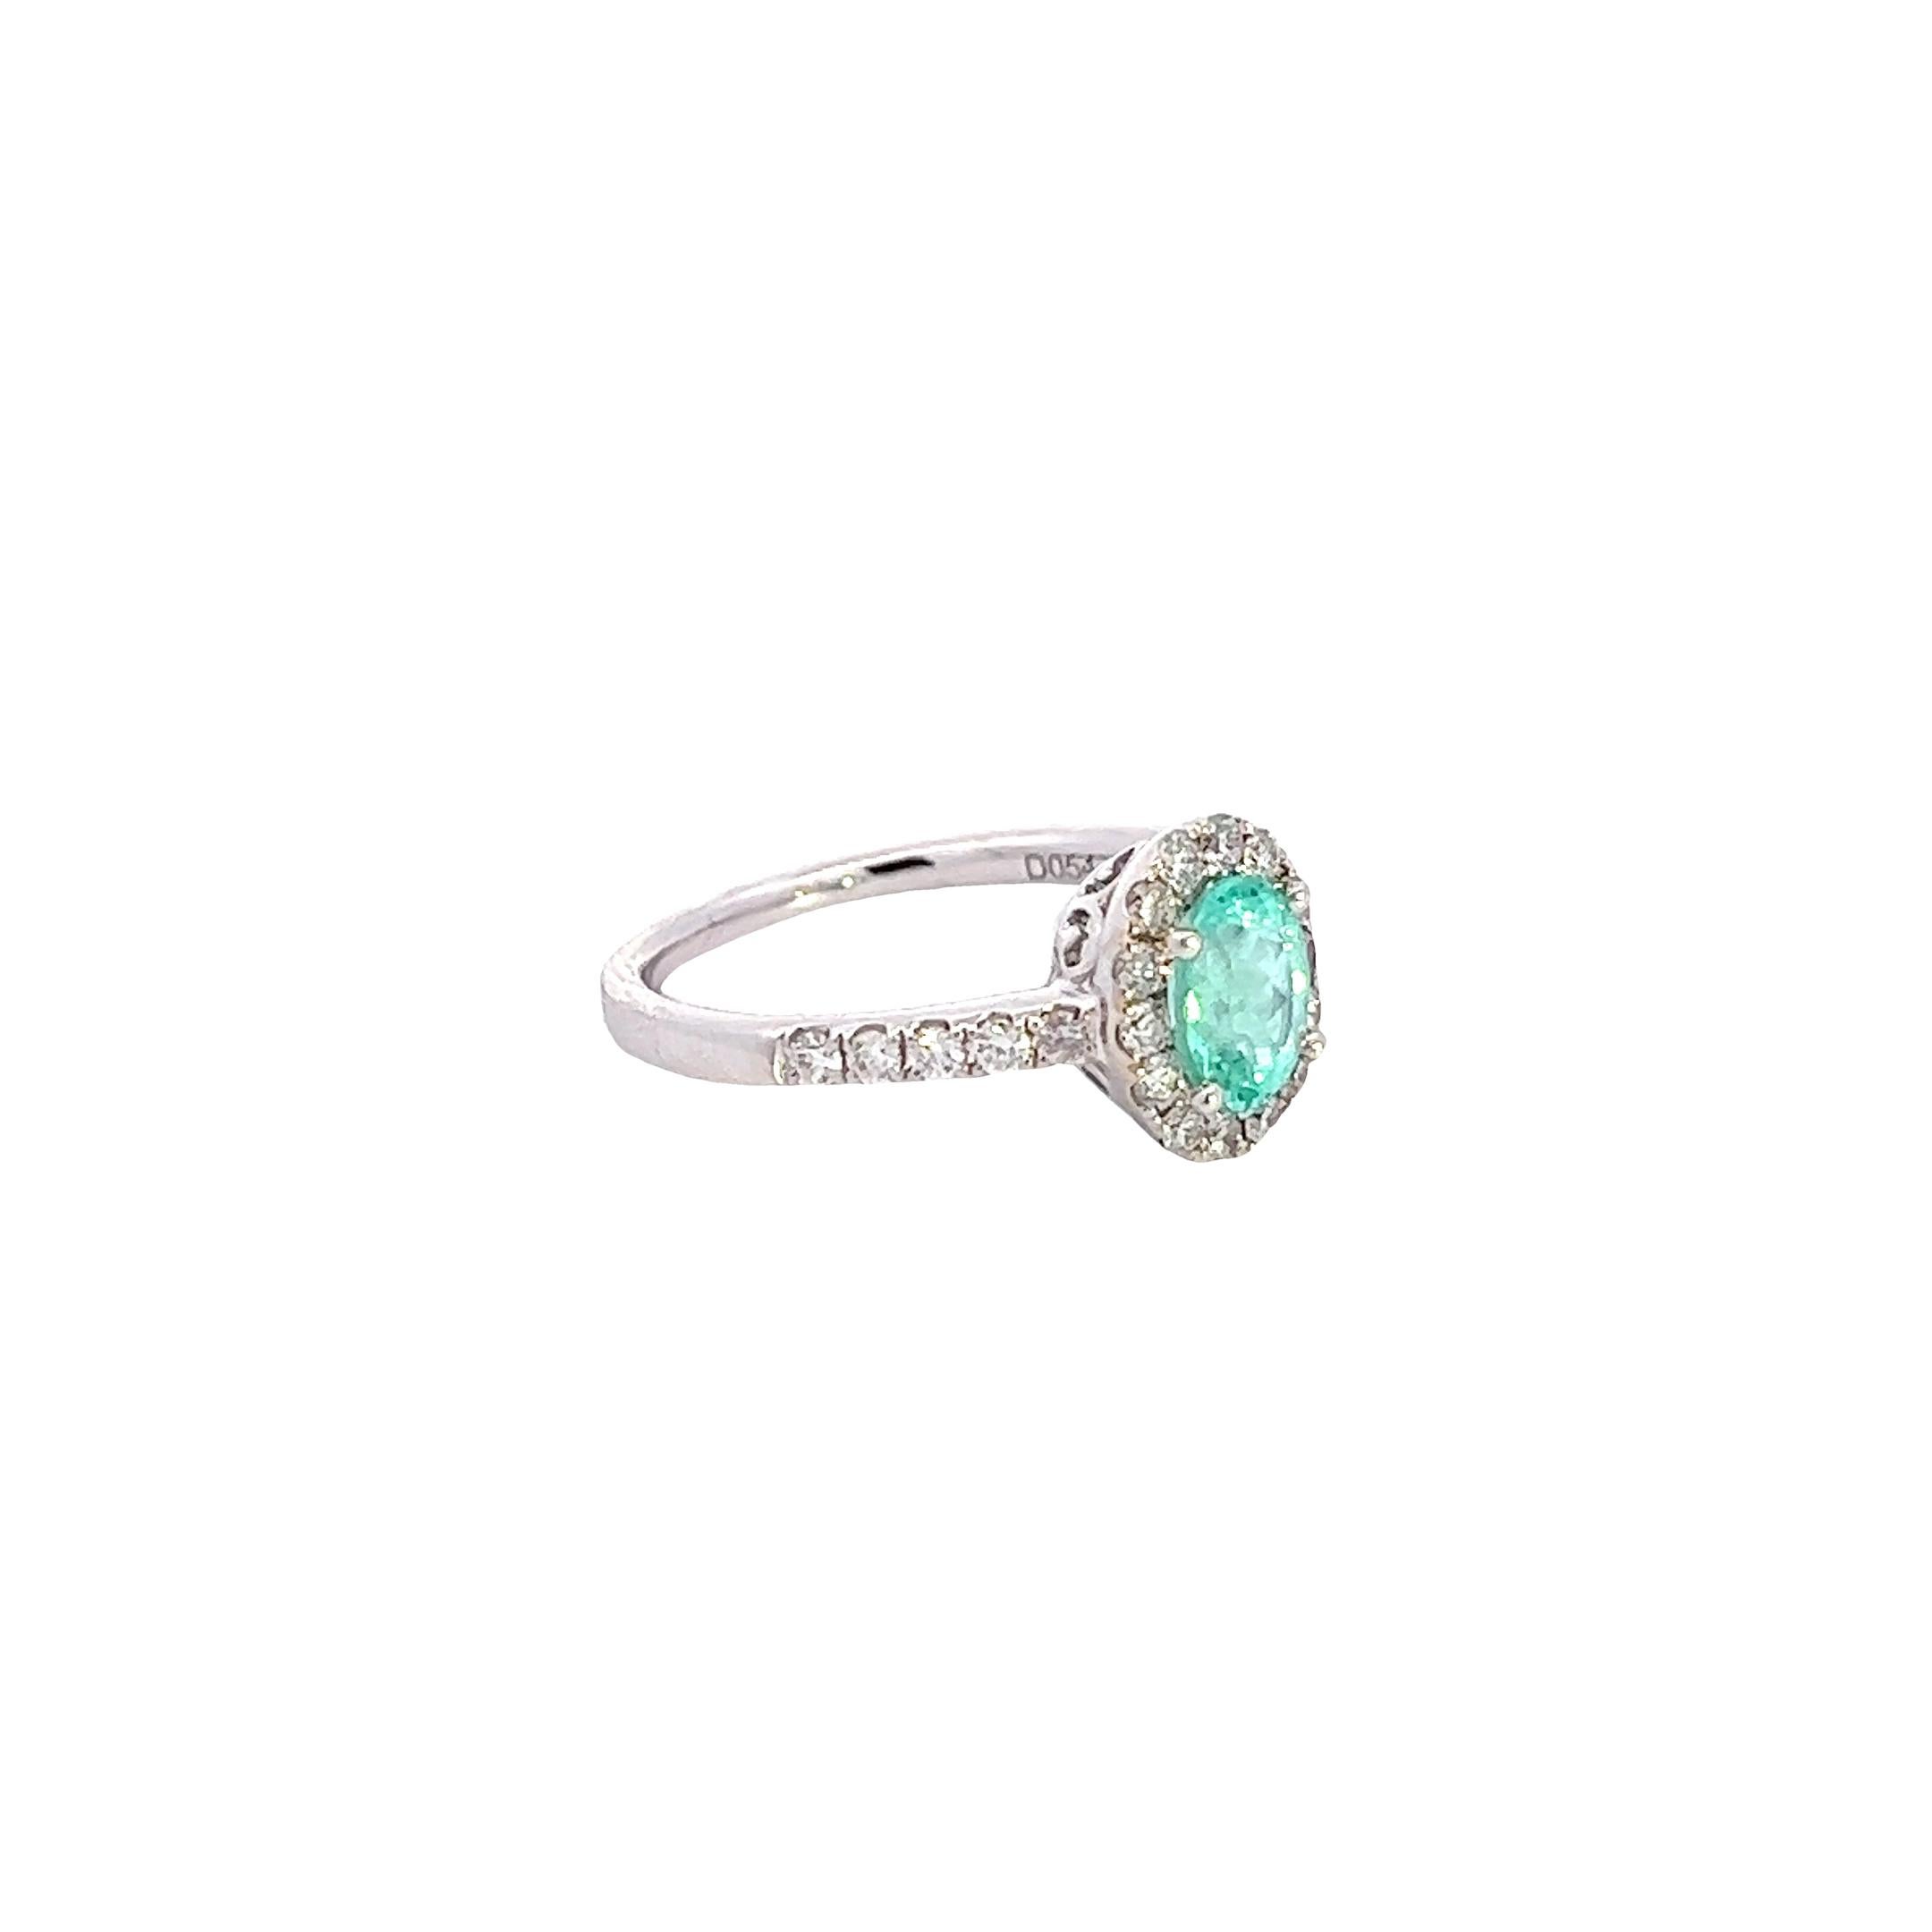 For Sale:  Elegant 14k White Gold Paraiba Tourmaline Ring with Oval 0.89ct Natural Gemstone 3